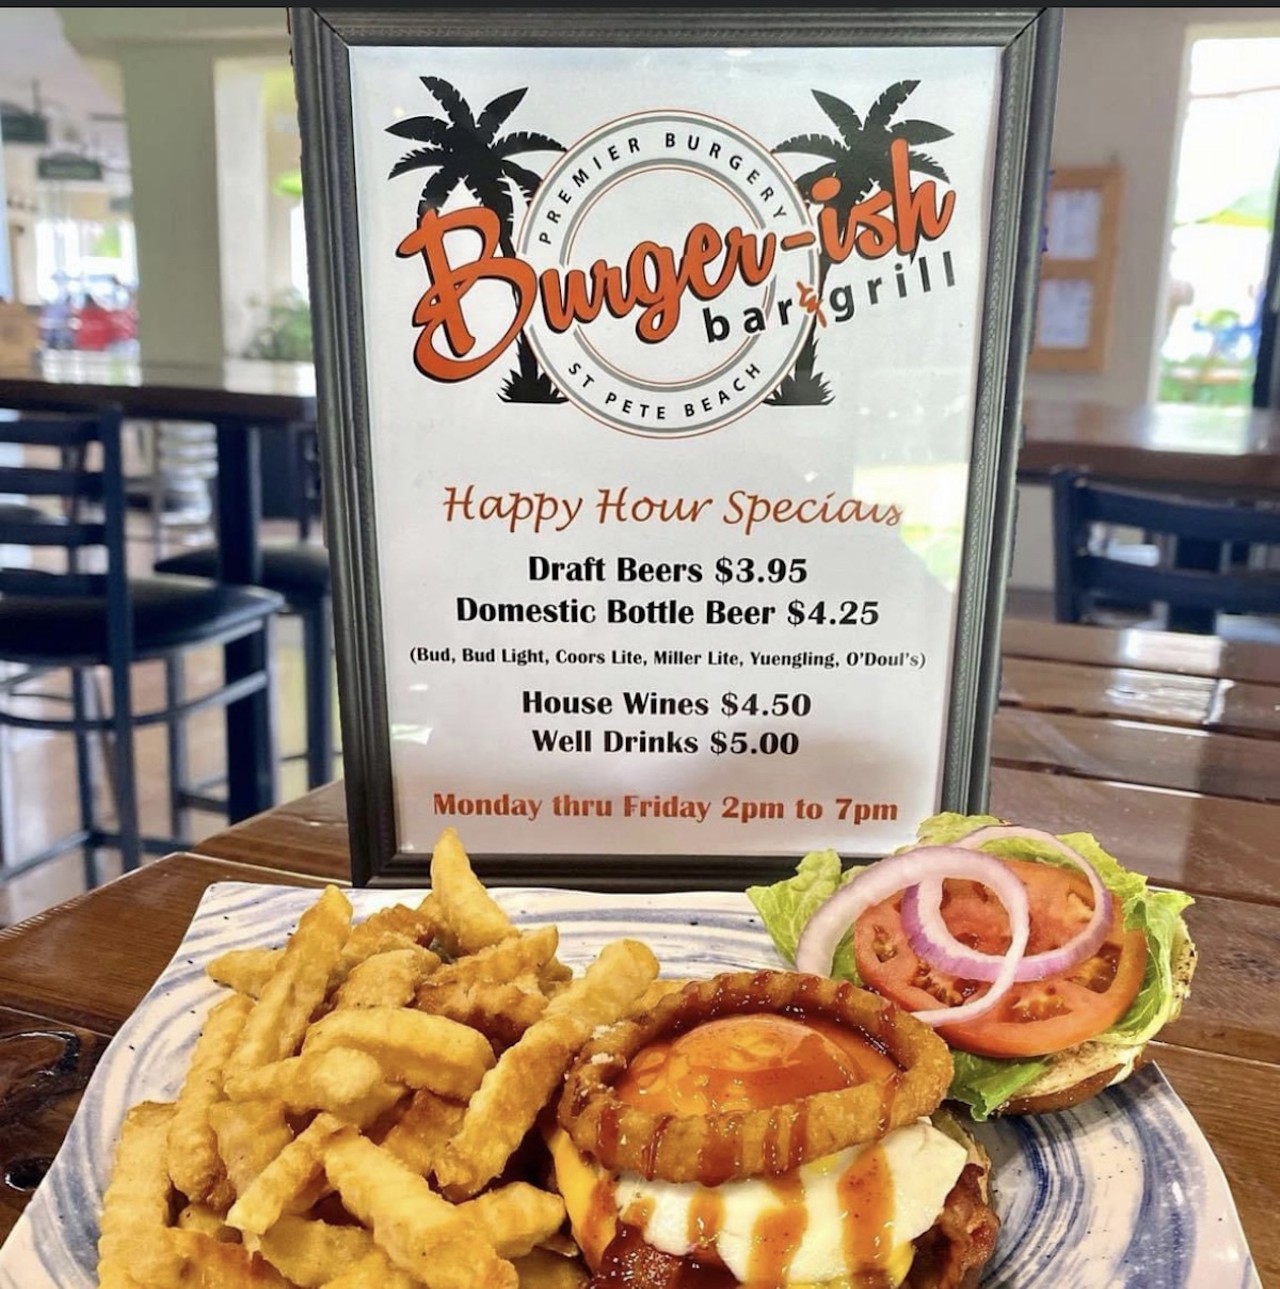 
Burgerish
4755 Gulf Blvd., St Pete Beach
St. Pete Special: 1 pound burger, bacon, American cheese, fried egg, fried onion, ring, housemaid, smoky bourbon sauce, lettuce, tomato and onion on a brioche butter with crispy fries. ($10
Photo courtesy of Burgerish